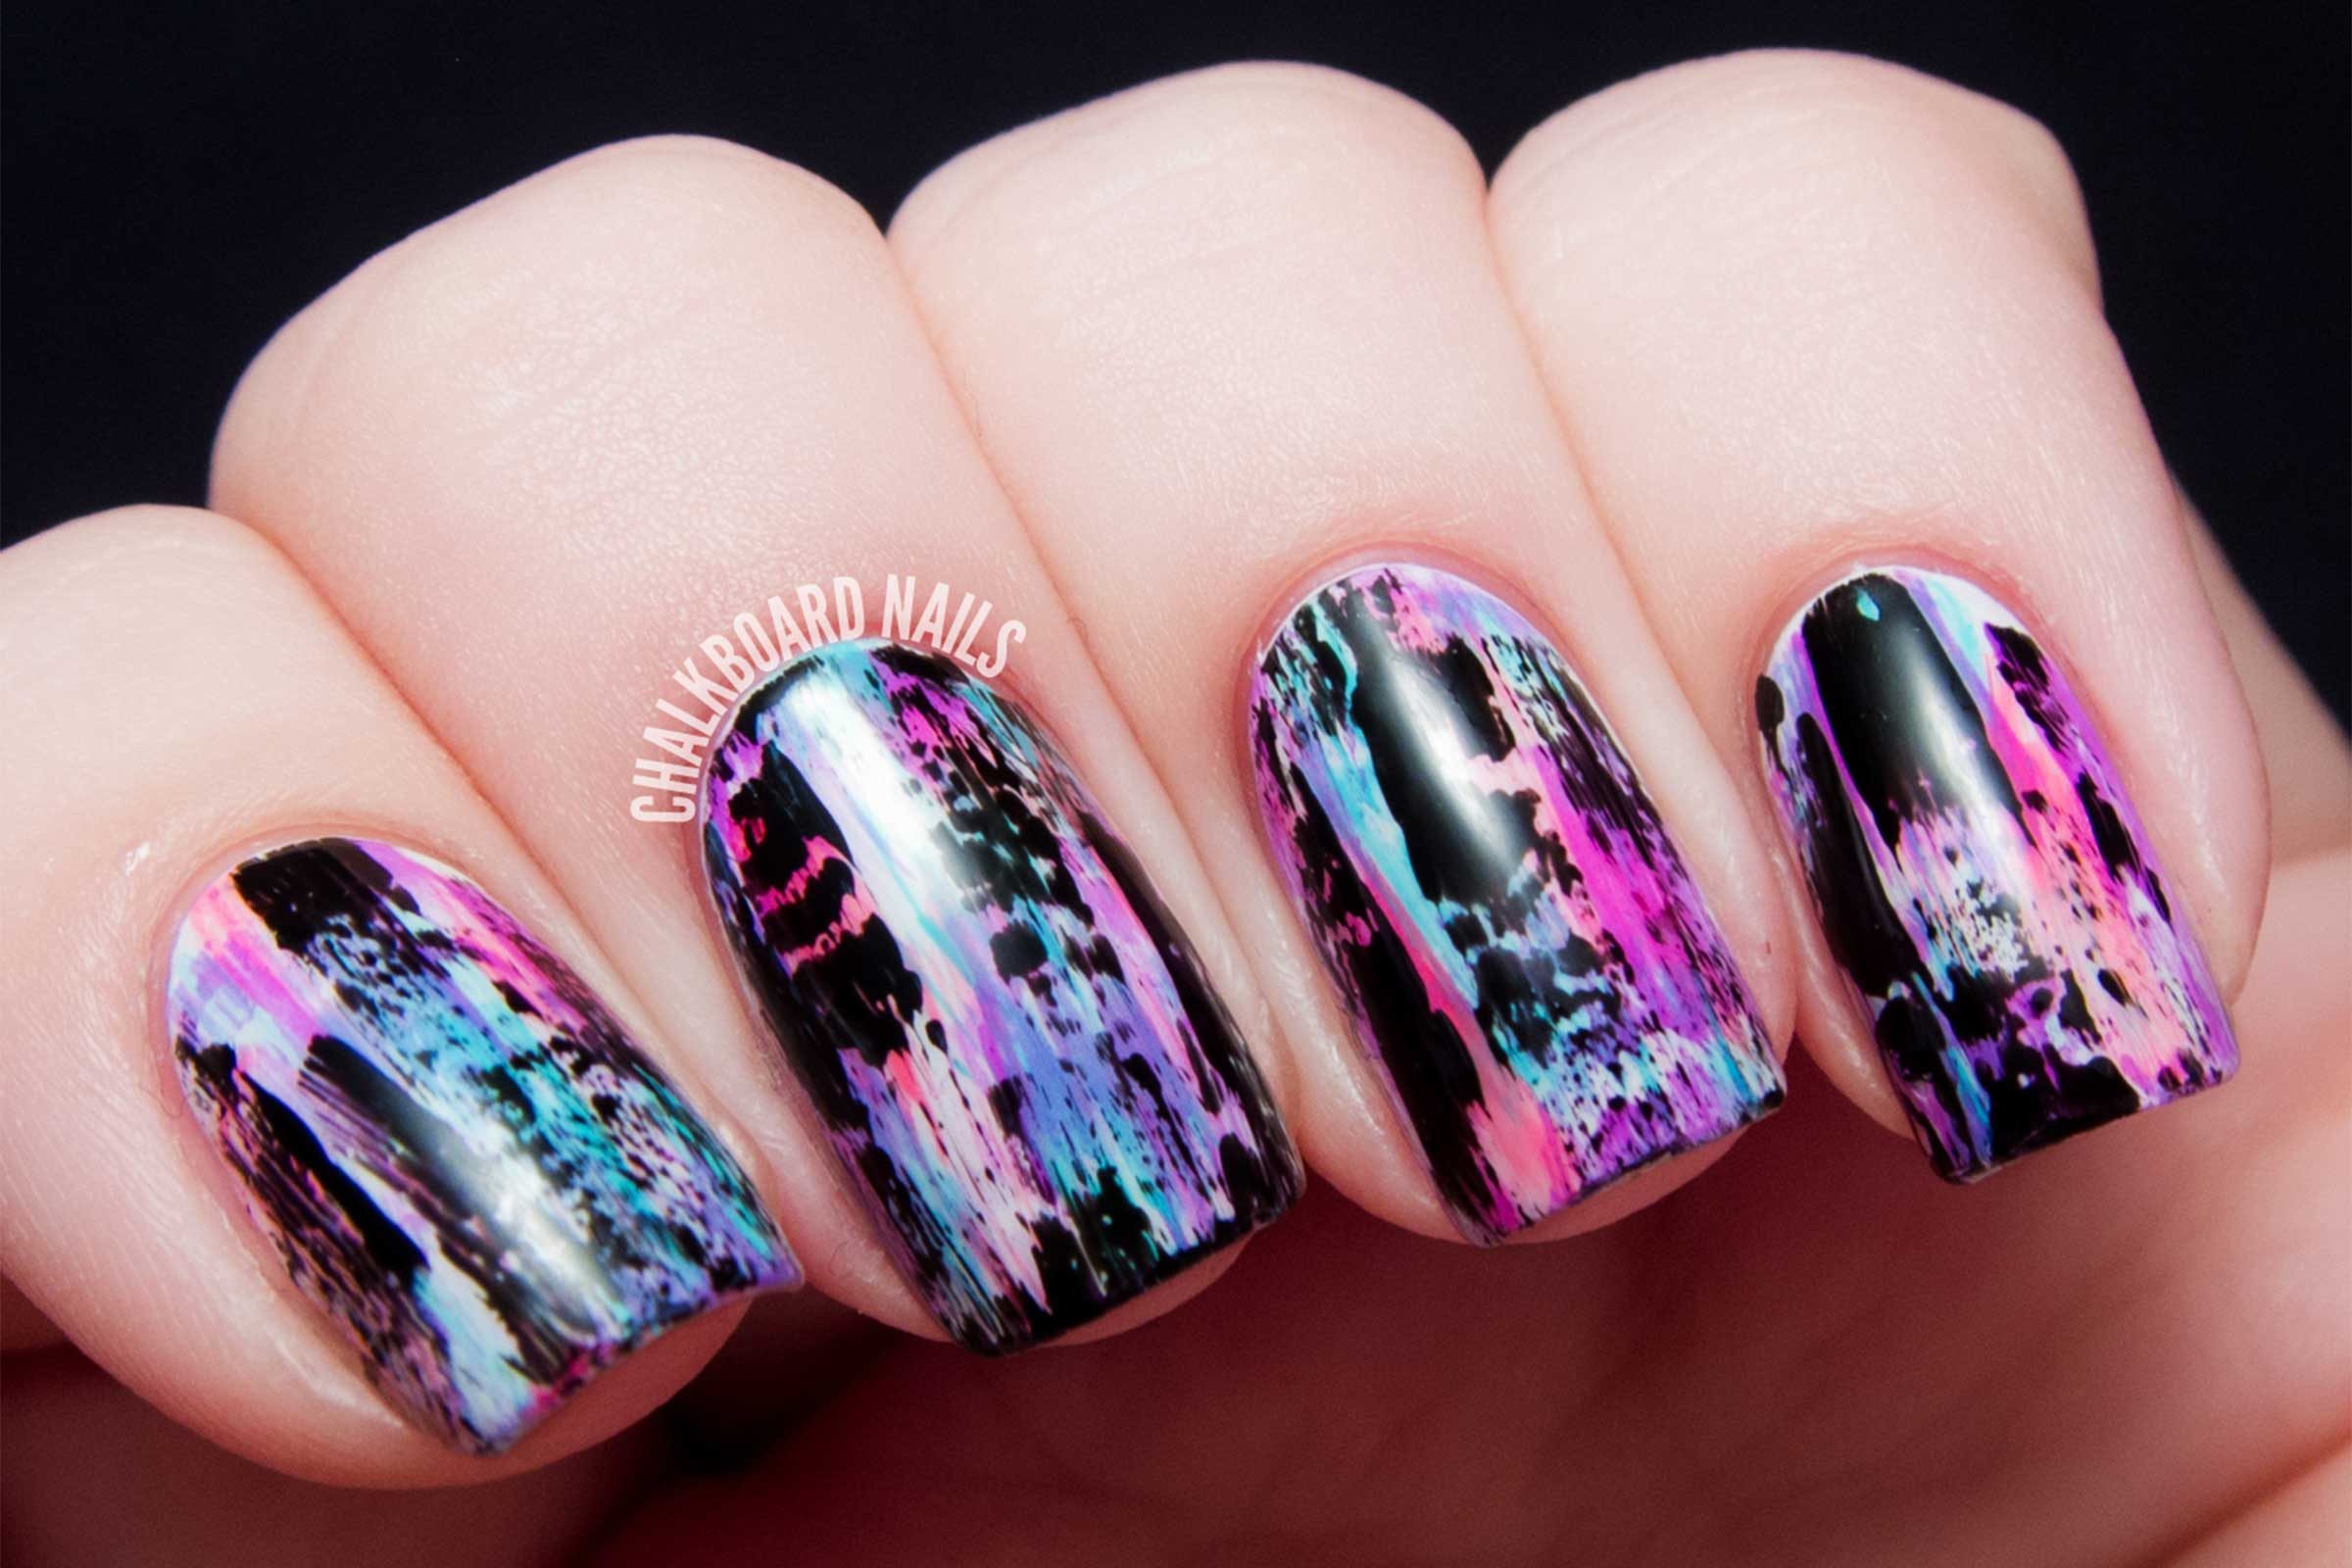 1. Funky Gel Nail Art Designs for Short Nails - wide 4